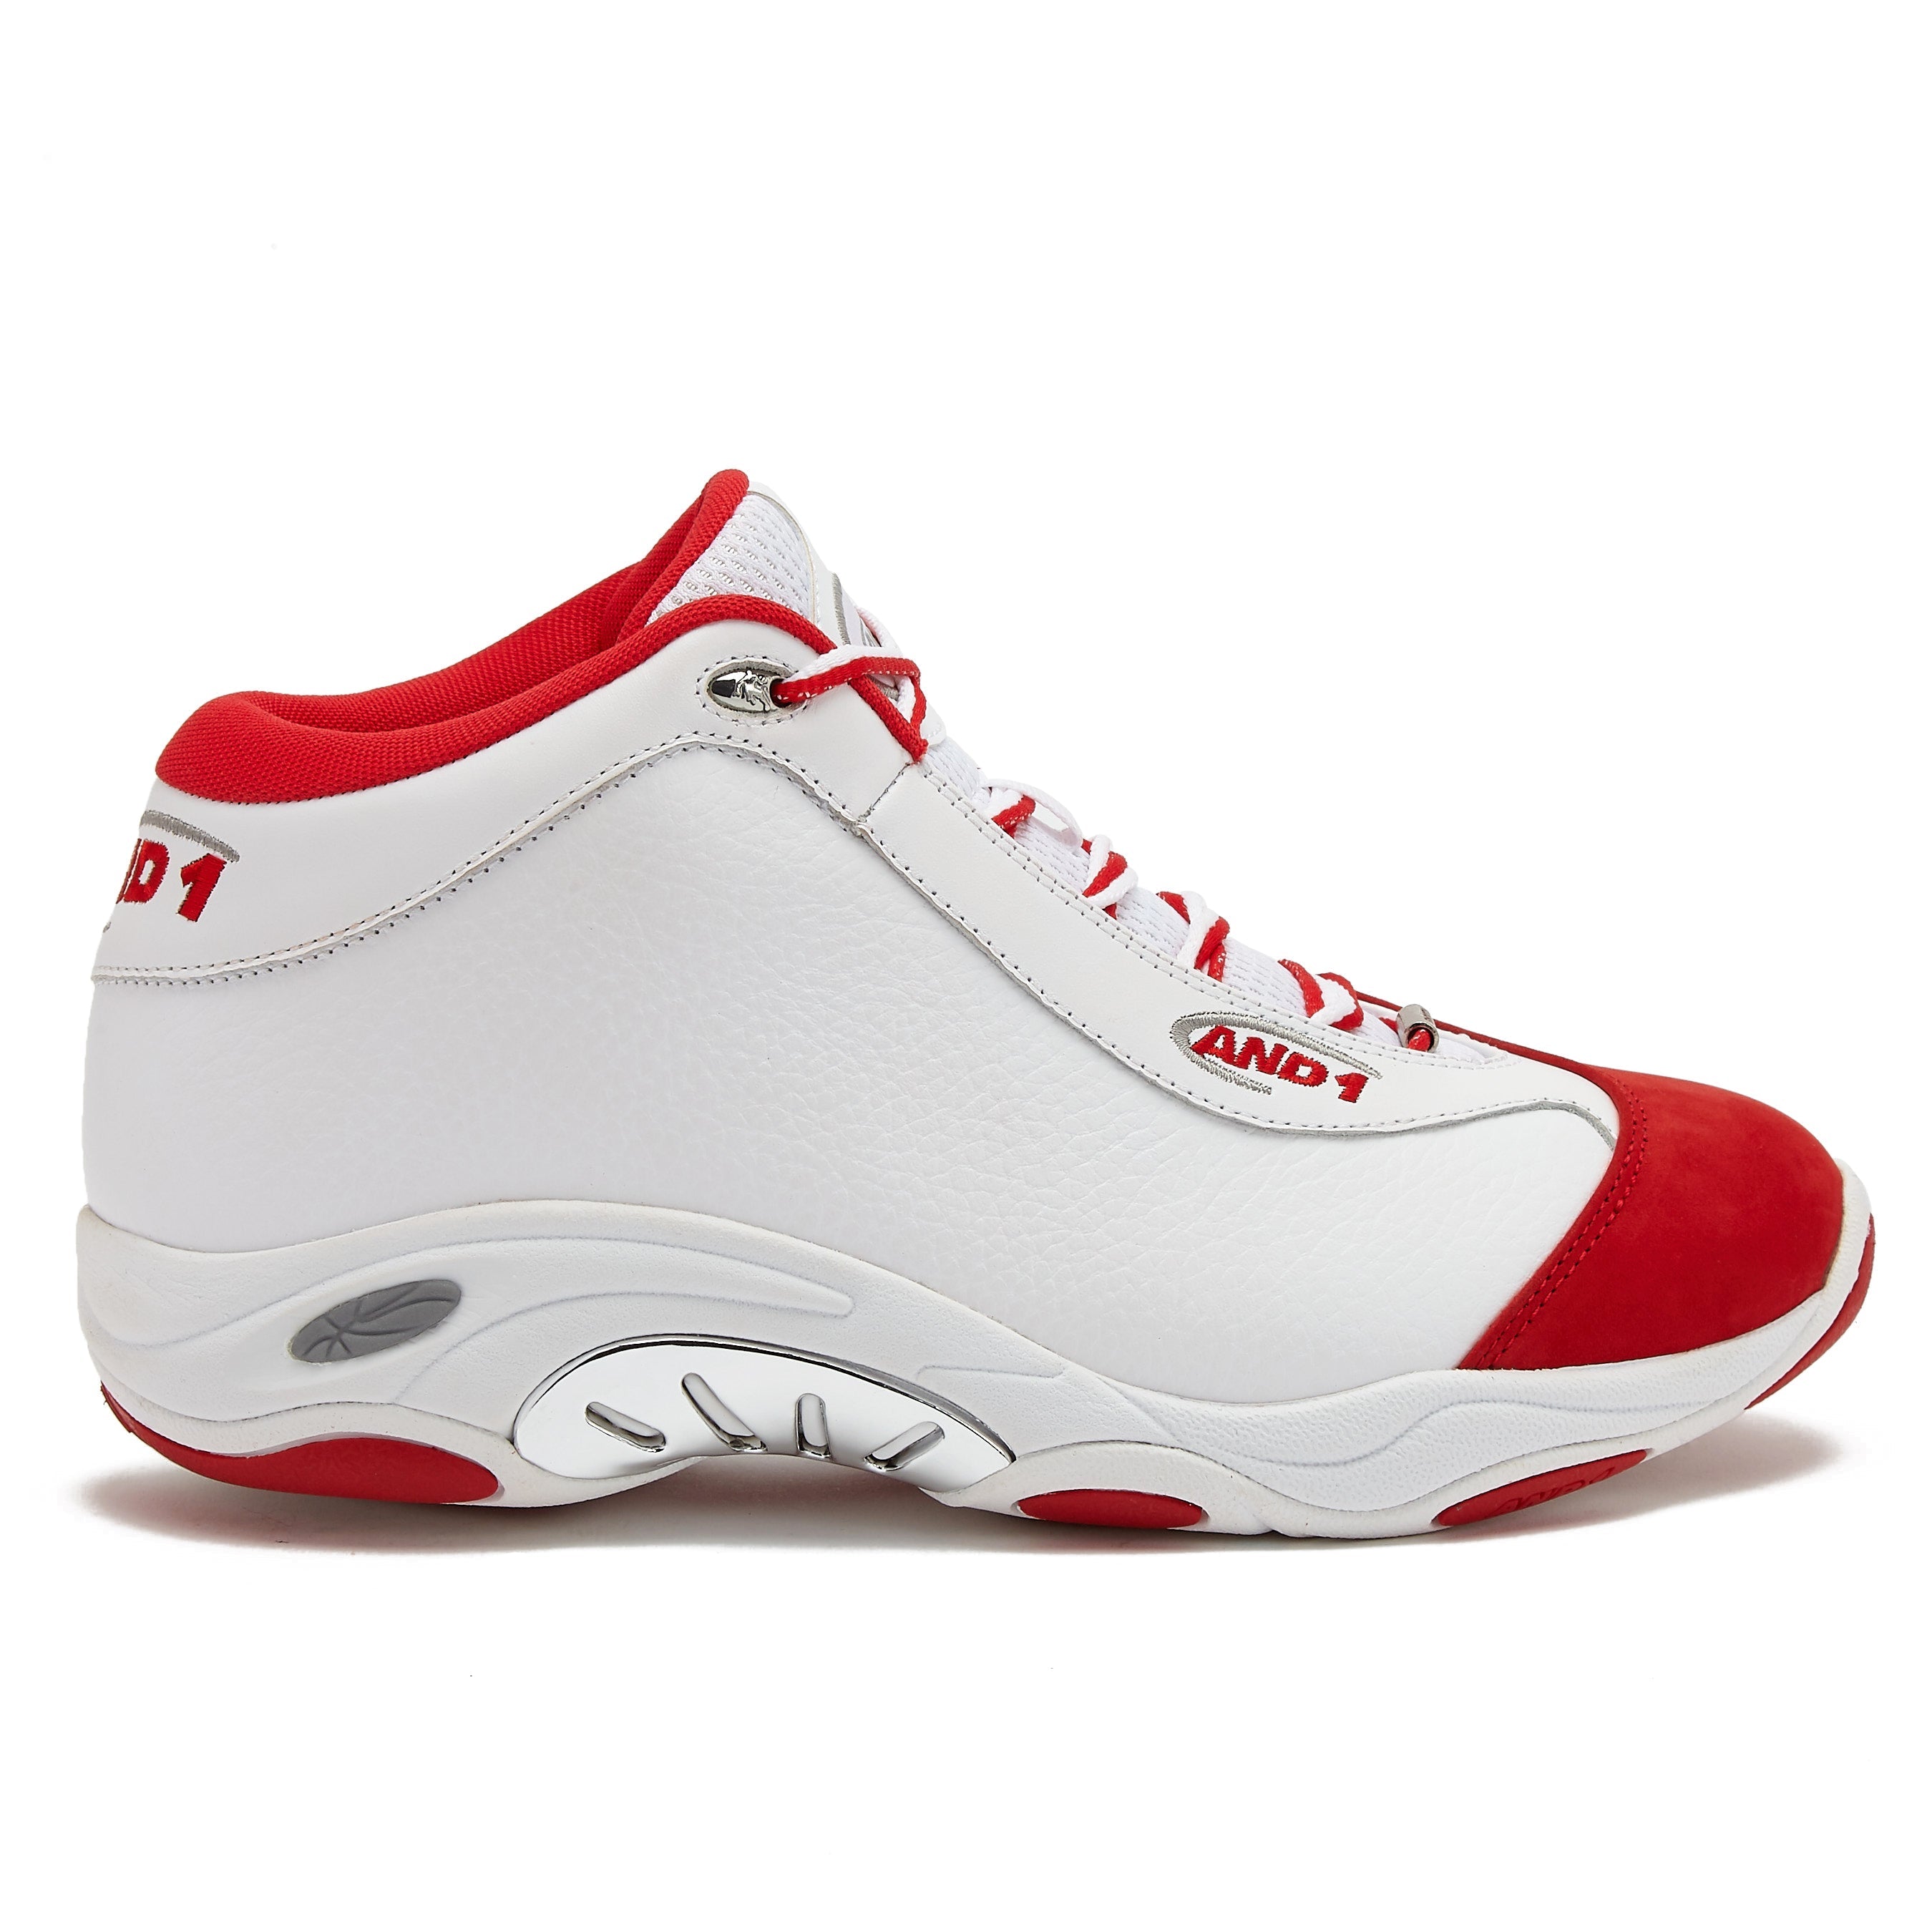 AND1 Basketball Shoes | Men's and Women's Basketball Shoes – AND1.com